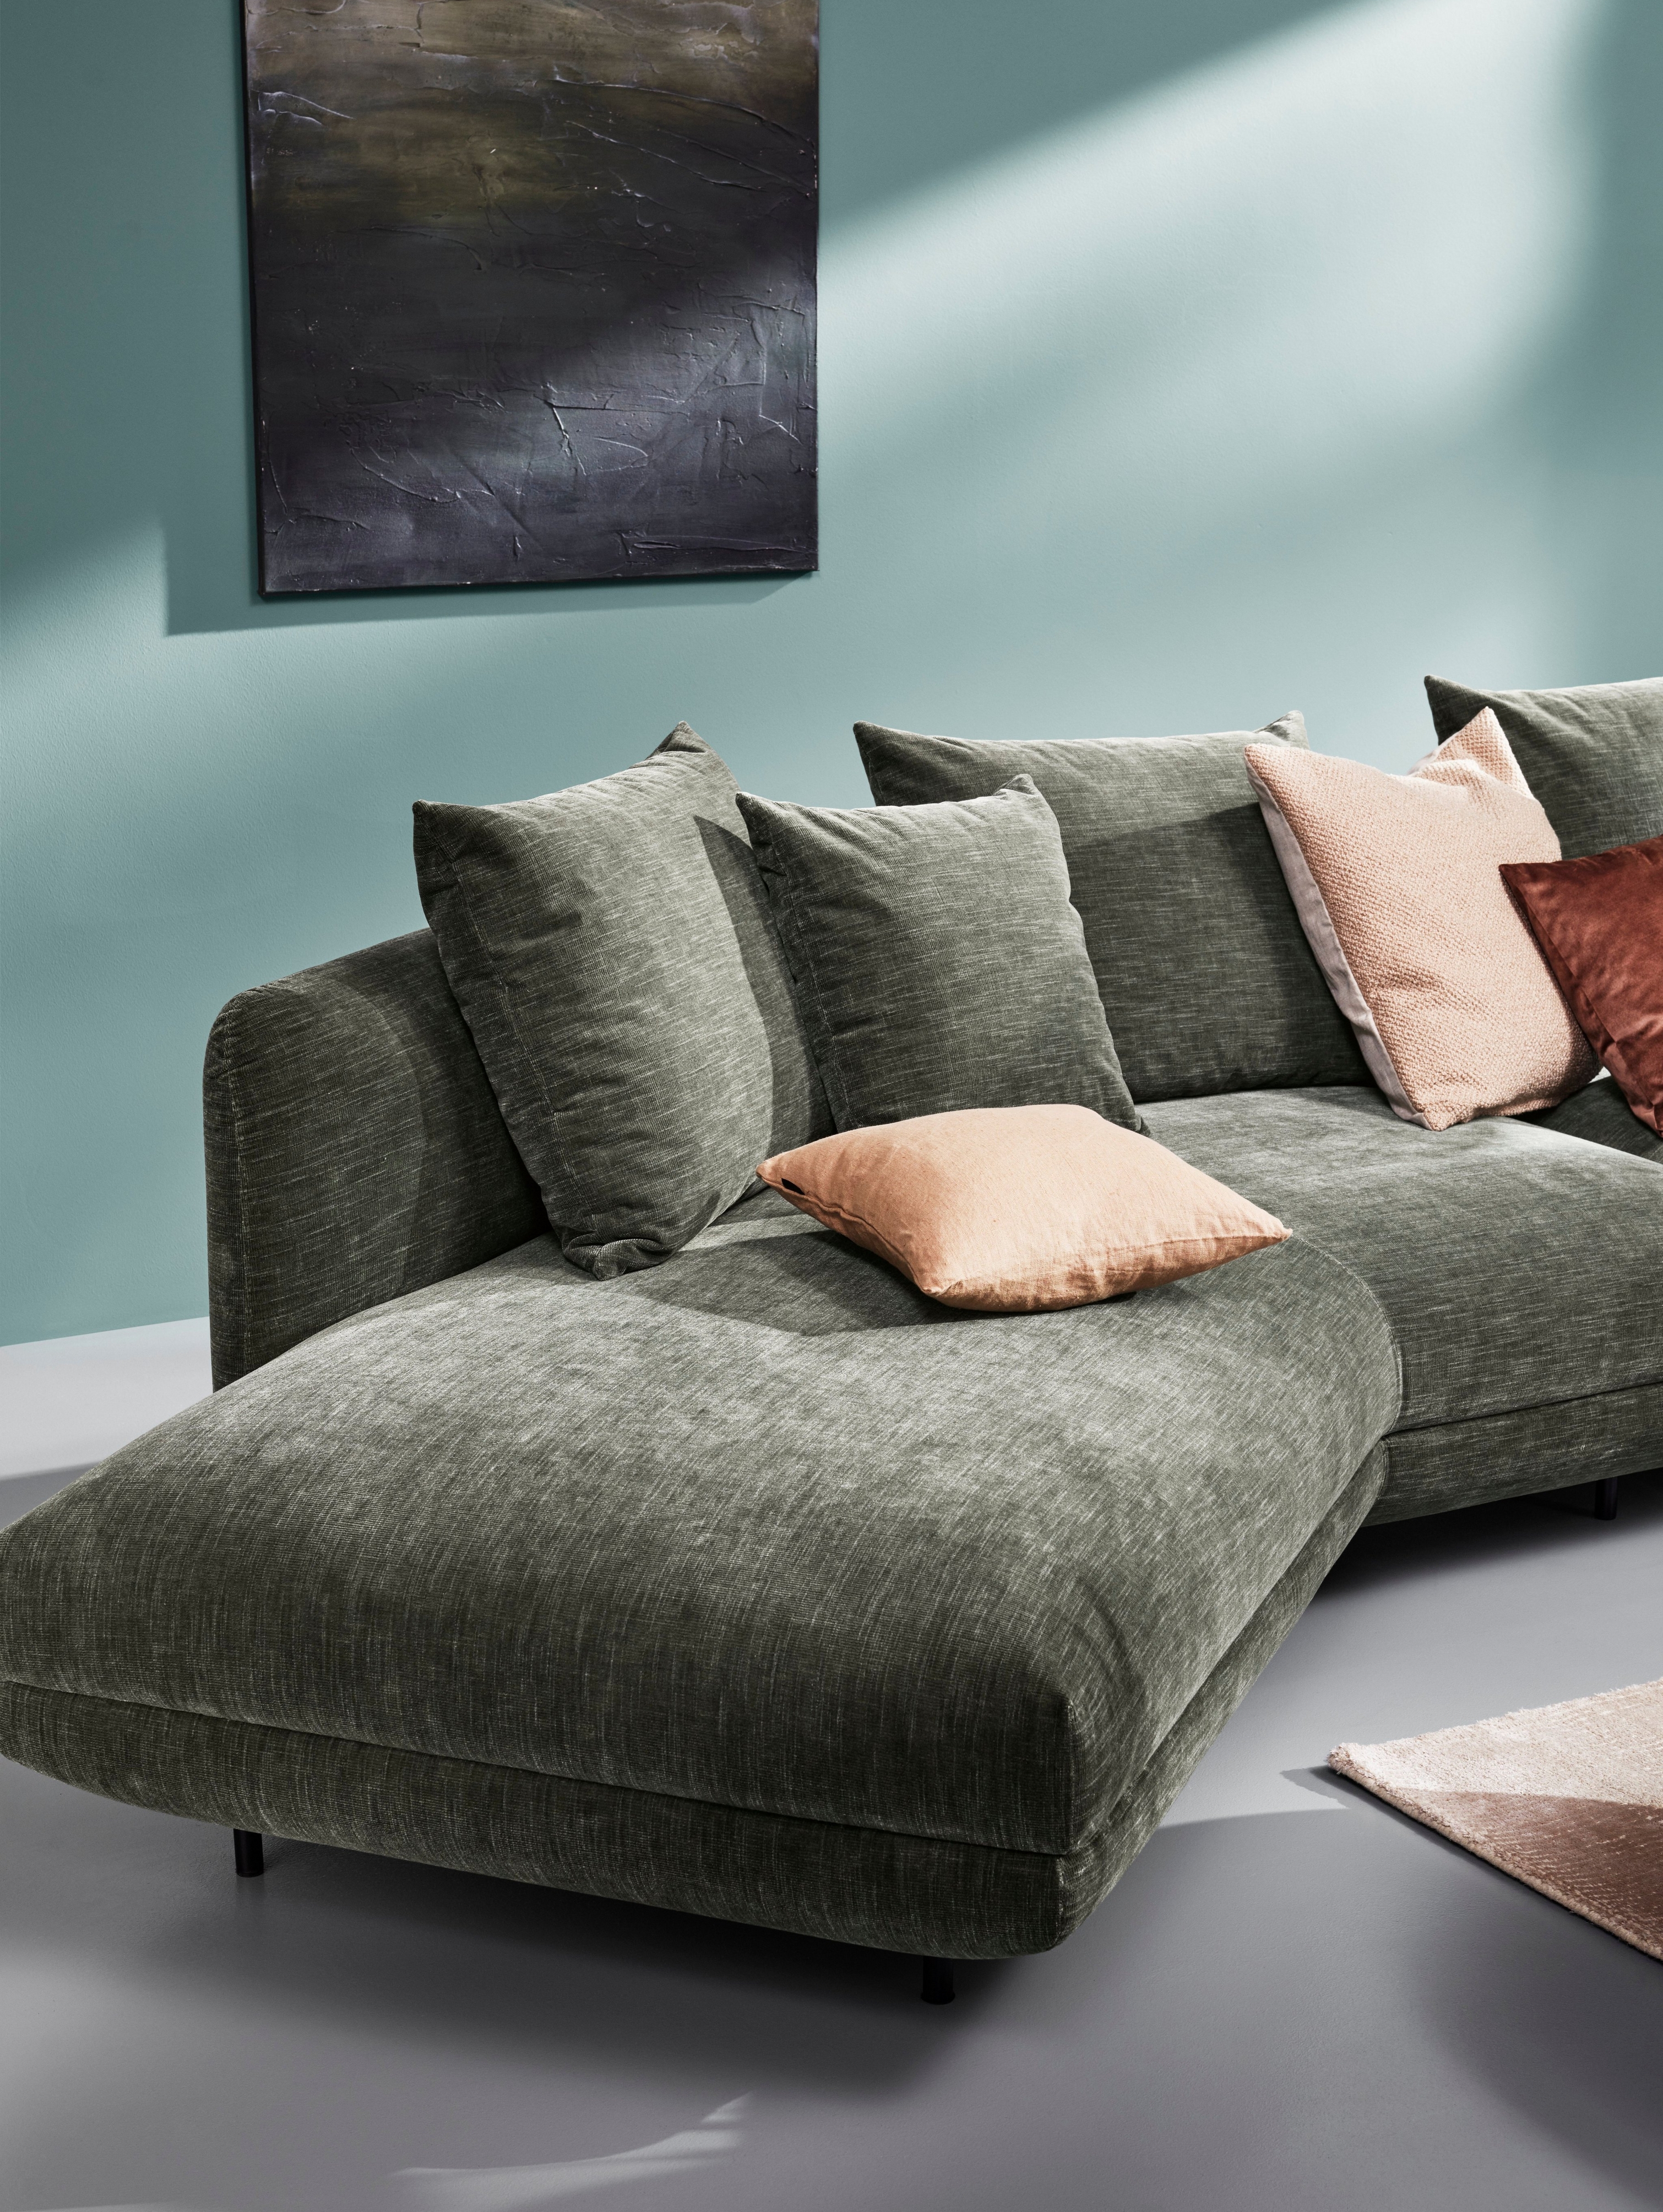 Green sectional Salamanca sofa with pillows against a teal wall with abstract art